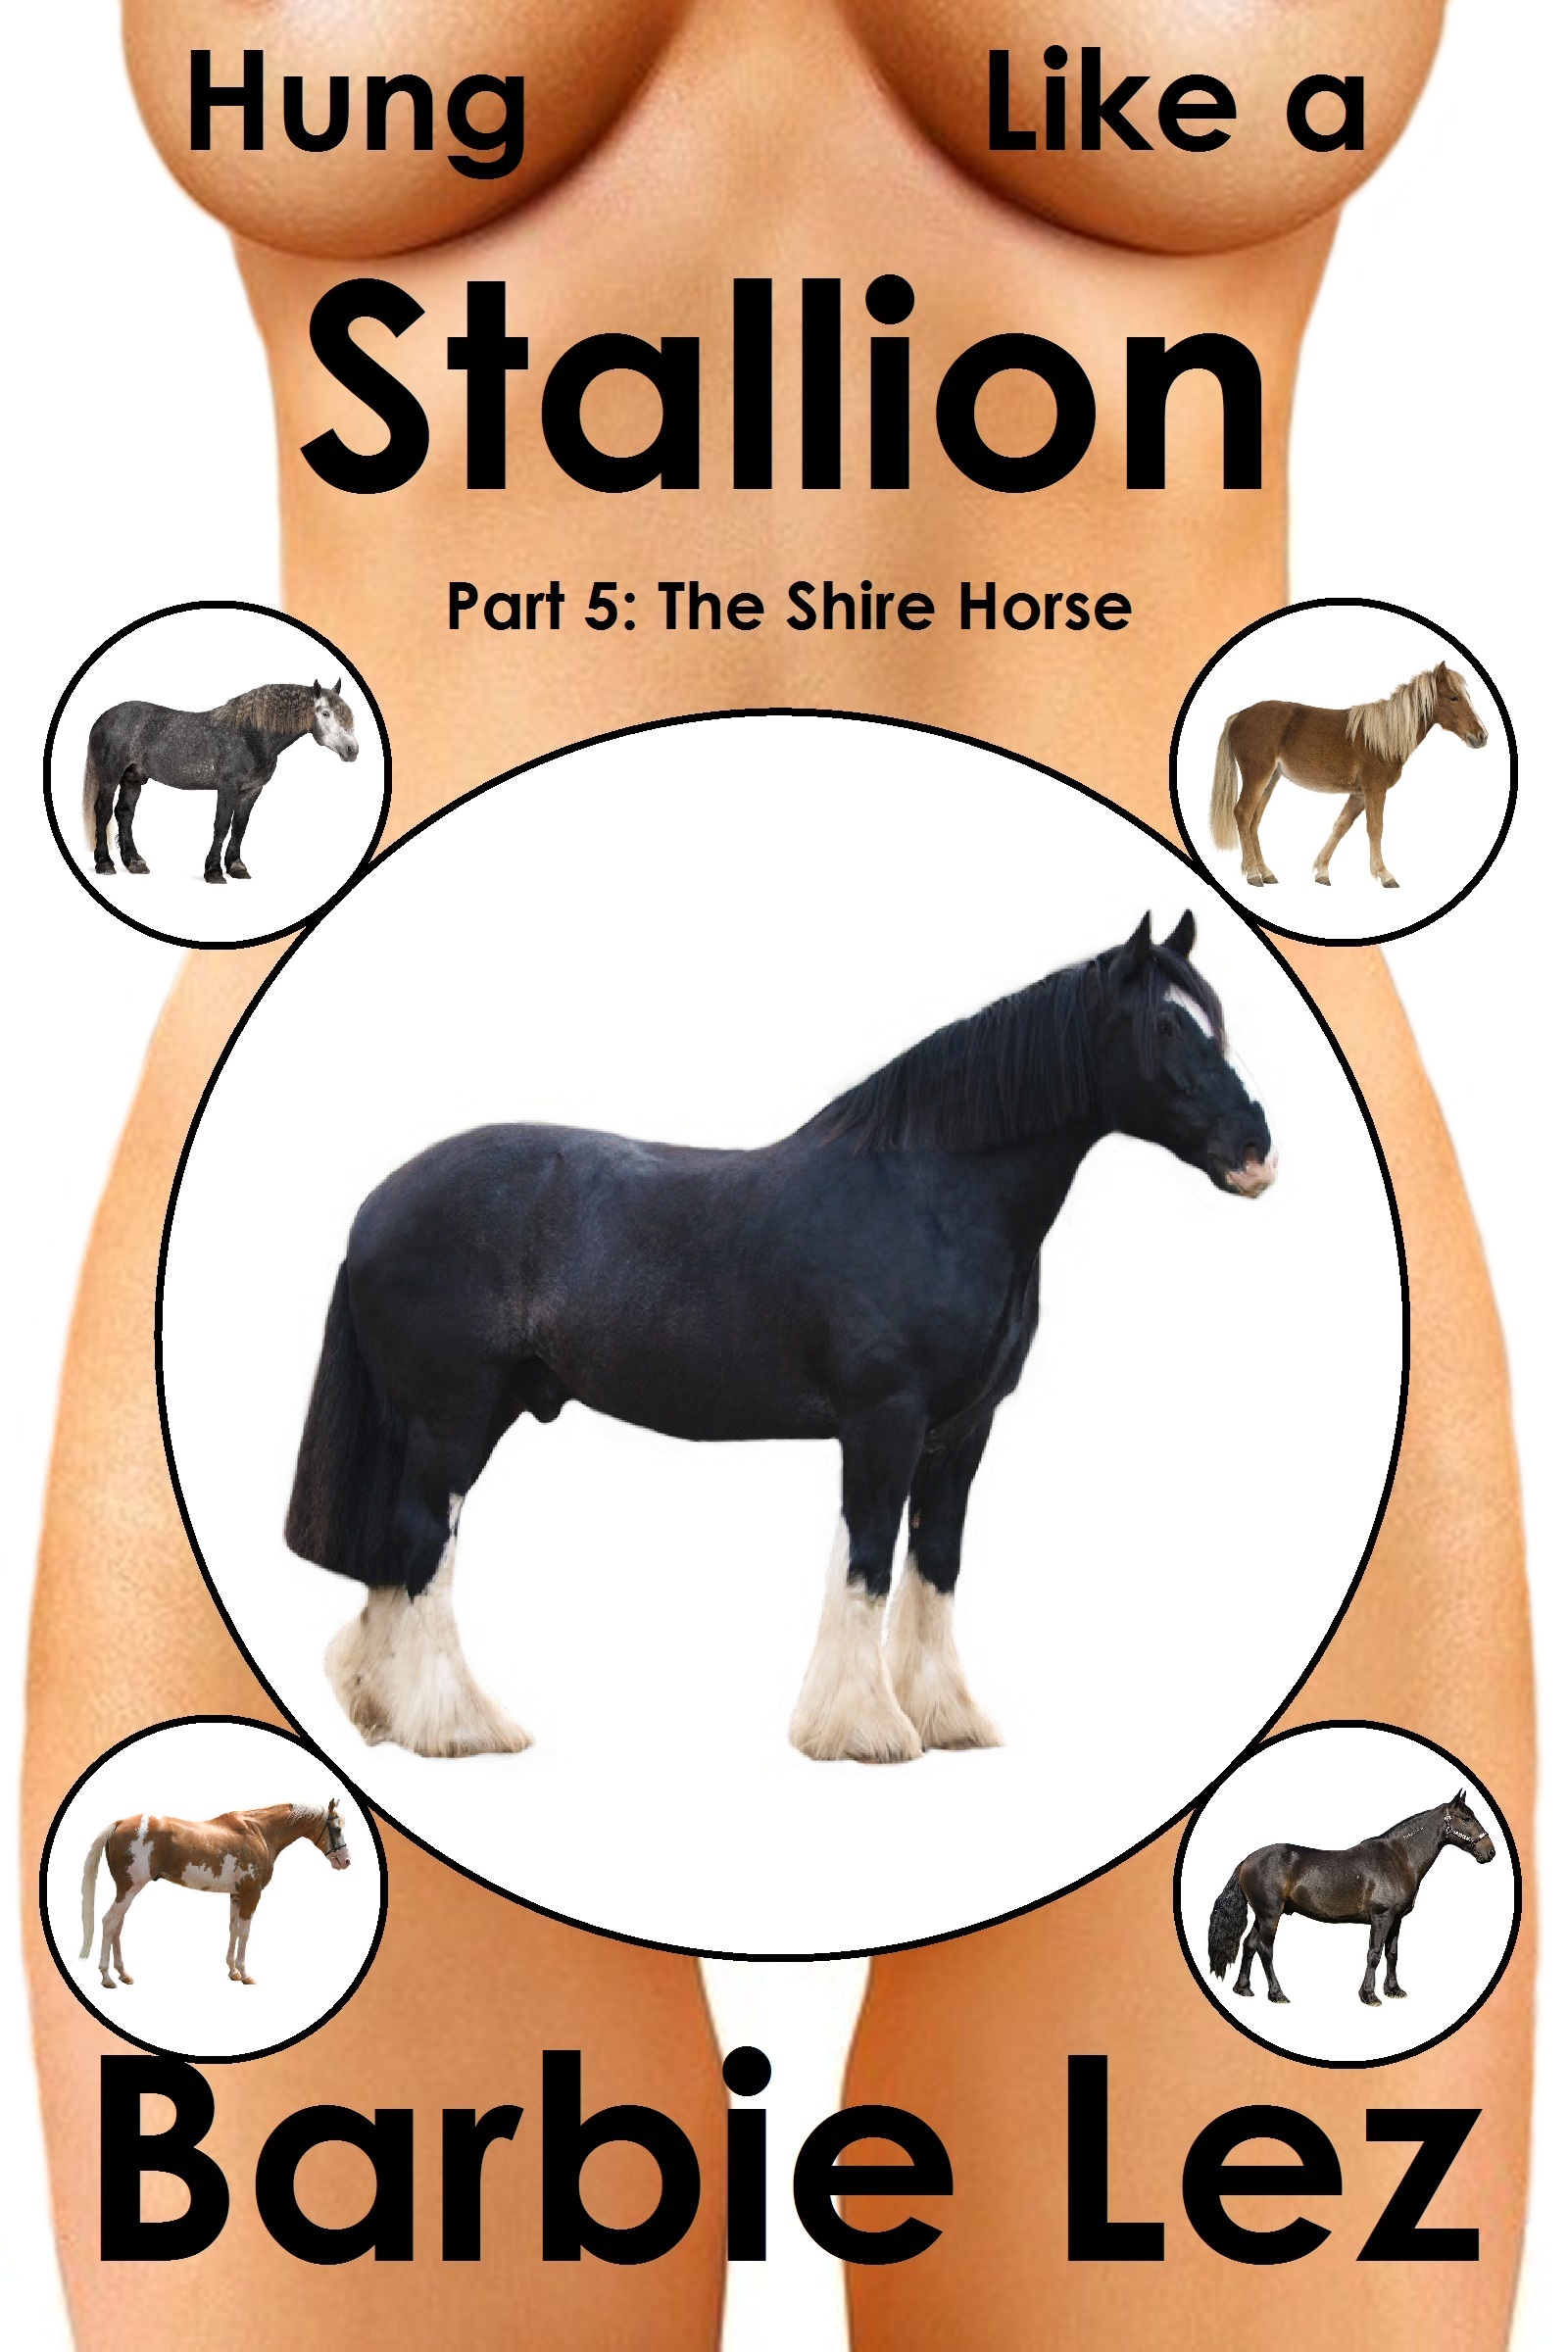 Hung Like a Stallion - Part 5: The Shire Horse (Bestiality), an Ebook by  Barbie Lez